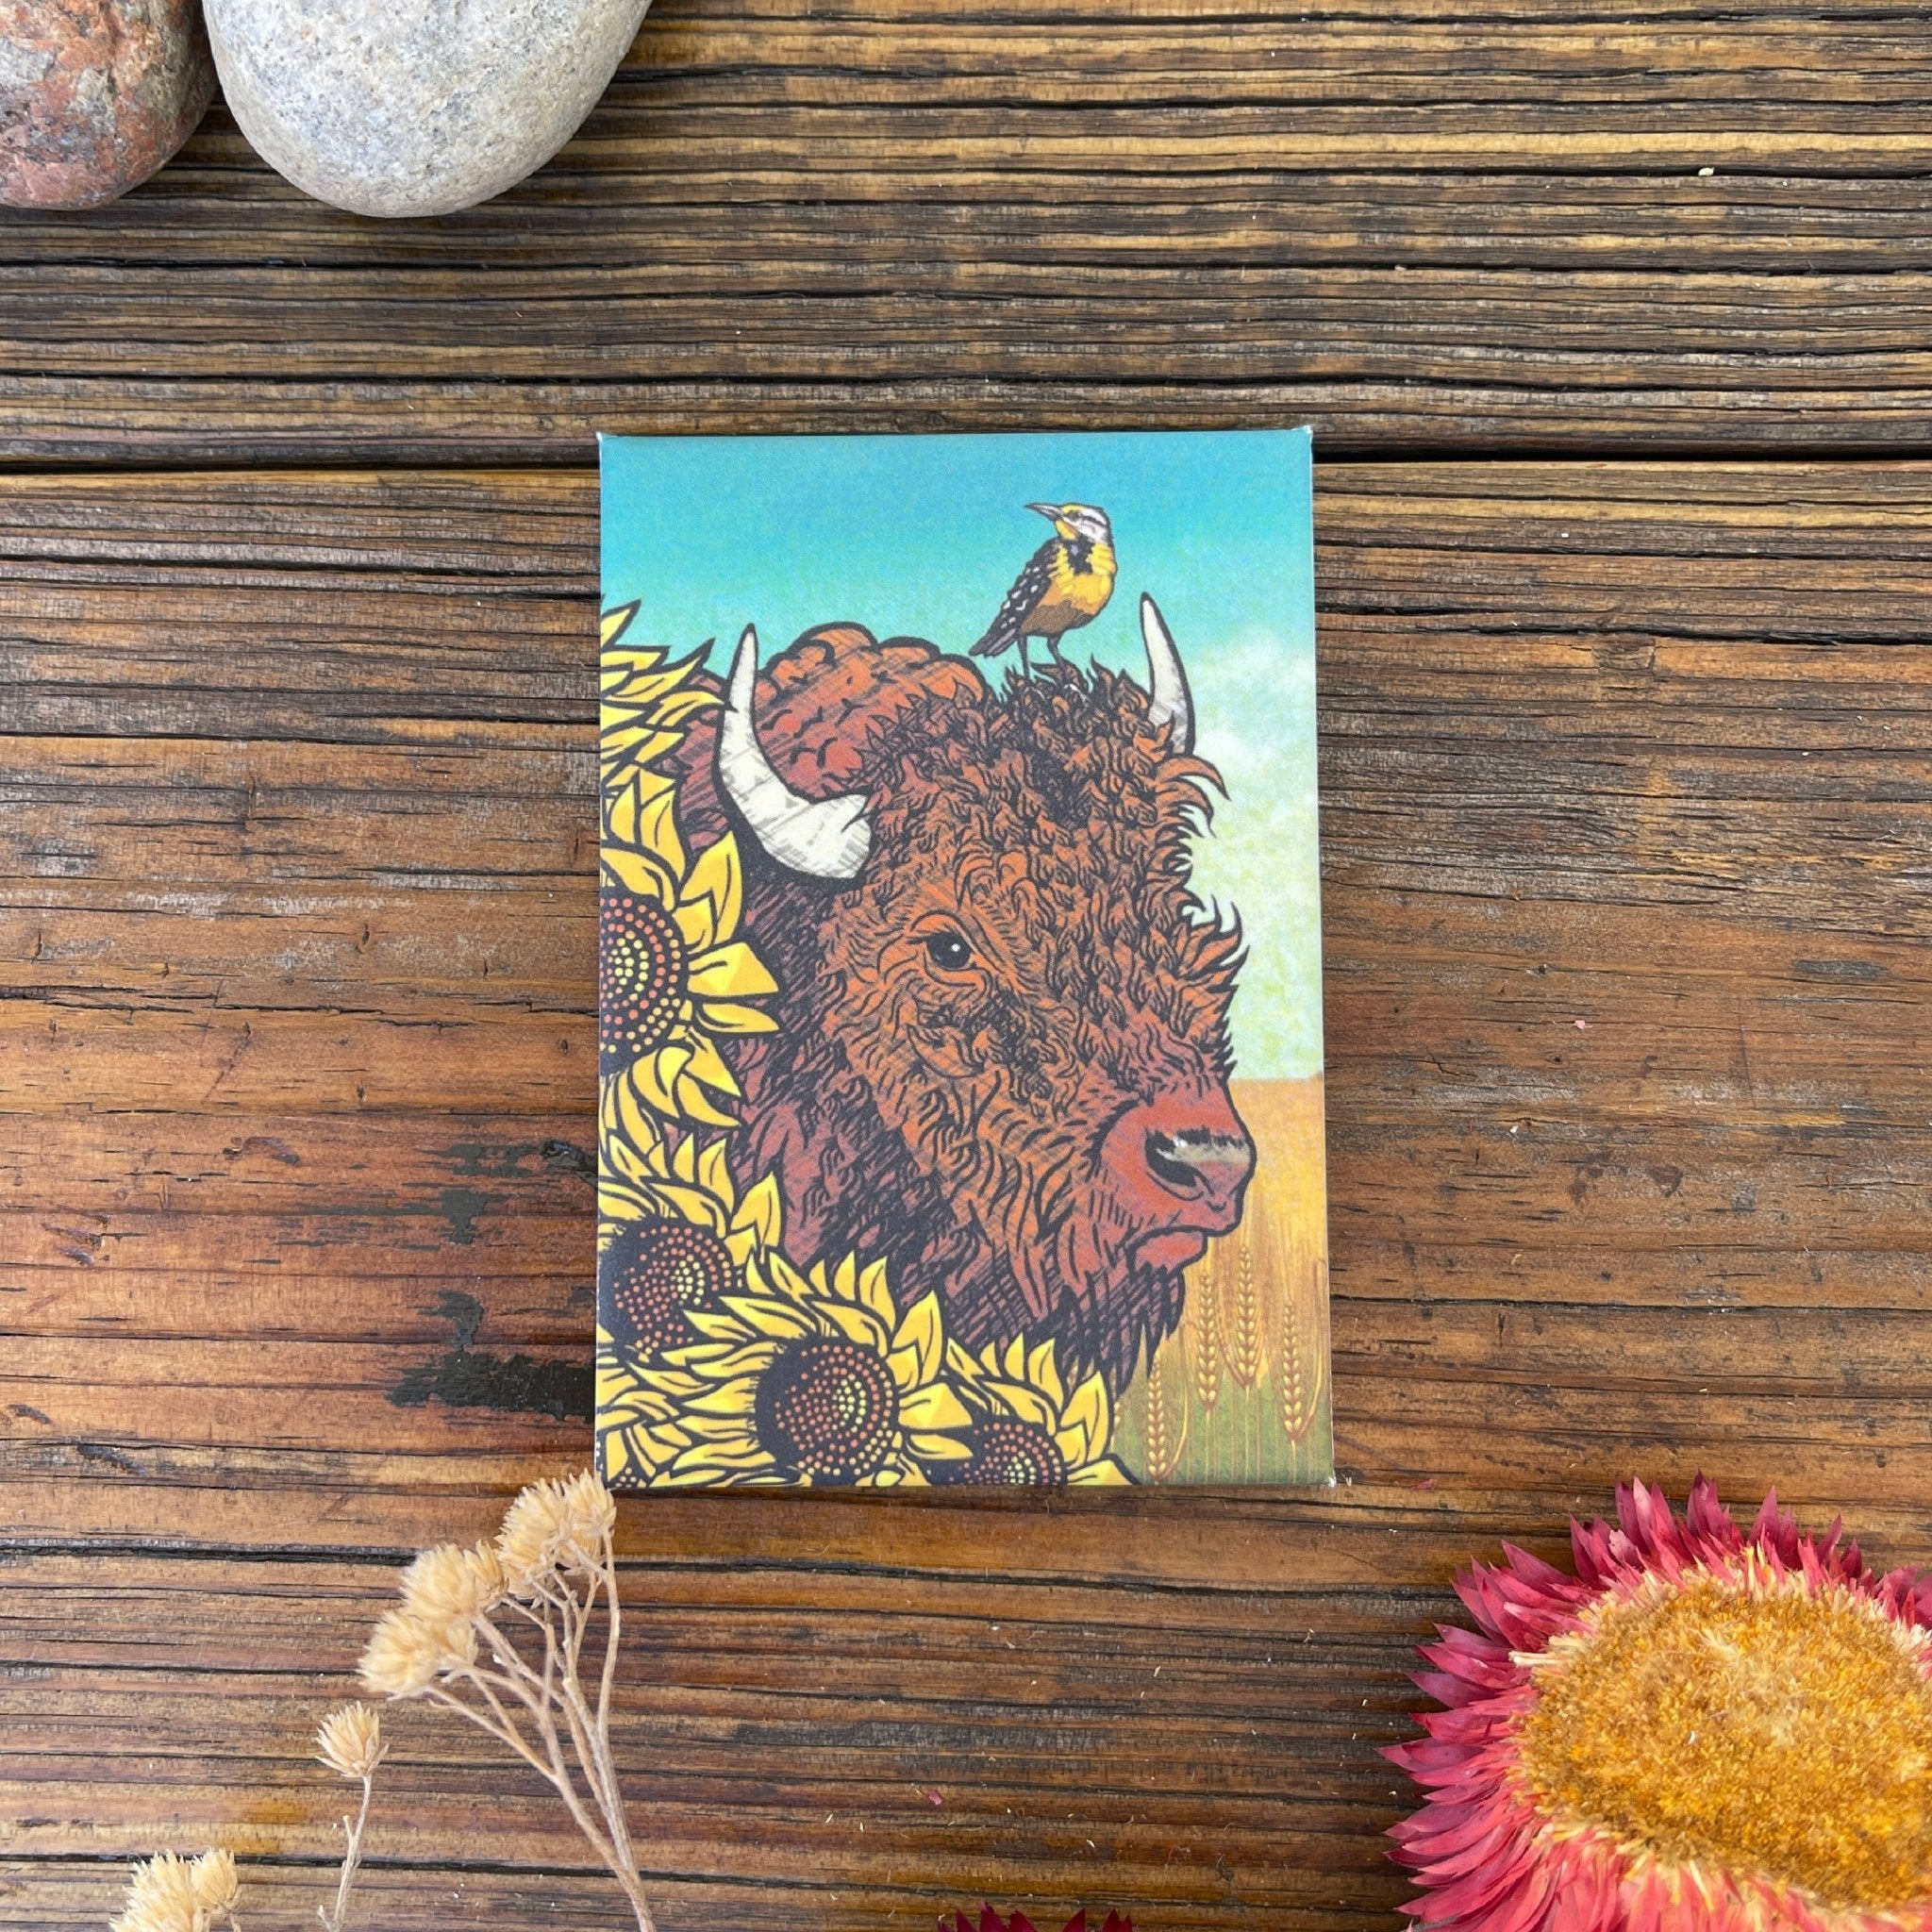 Bison and Sunflowers Fridge Magnet, Fridge Magnets - Two Little Fruits